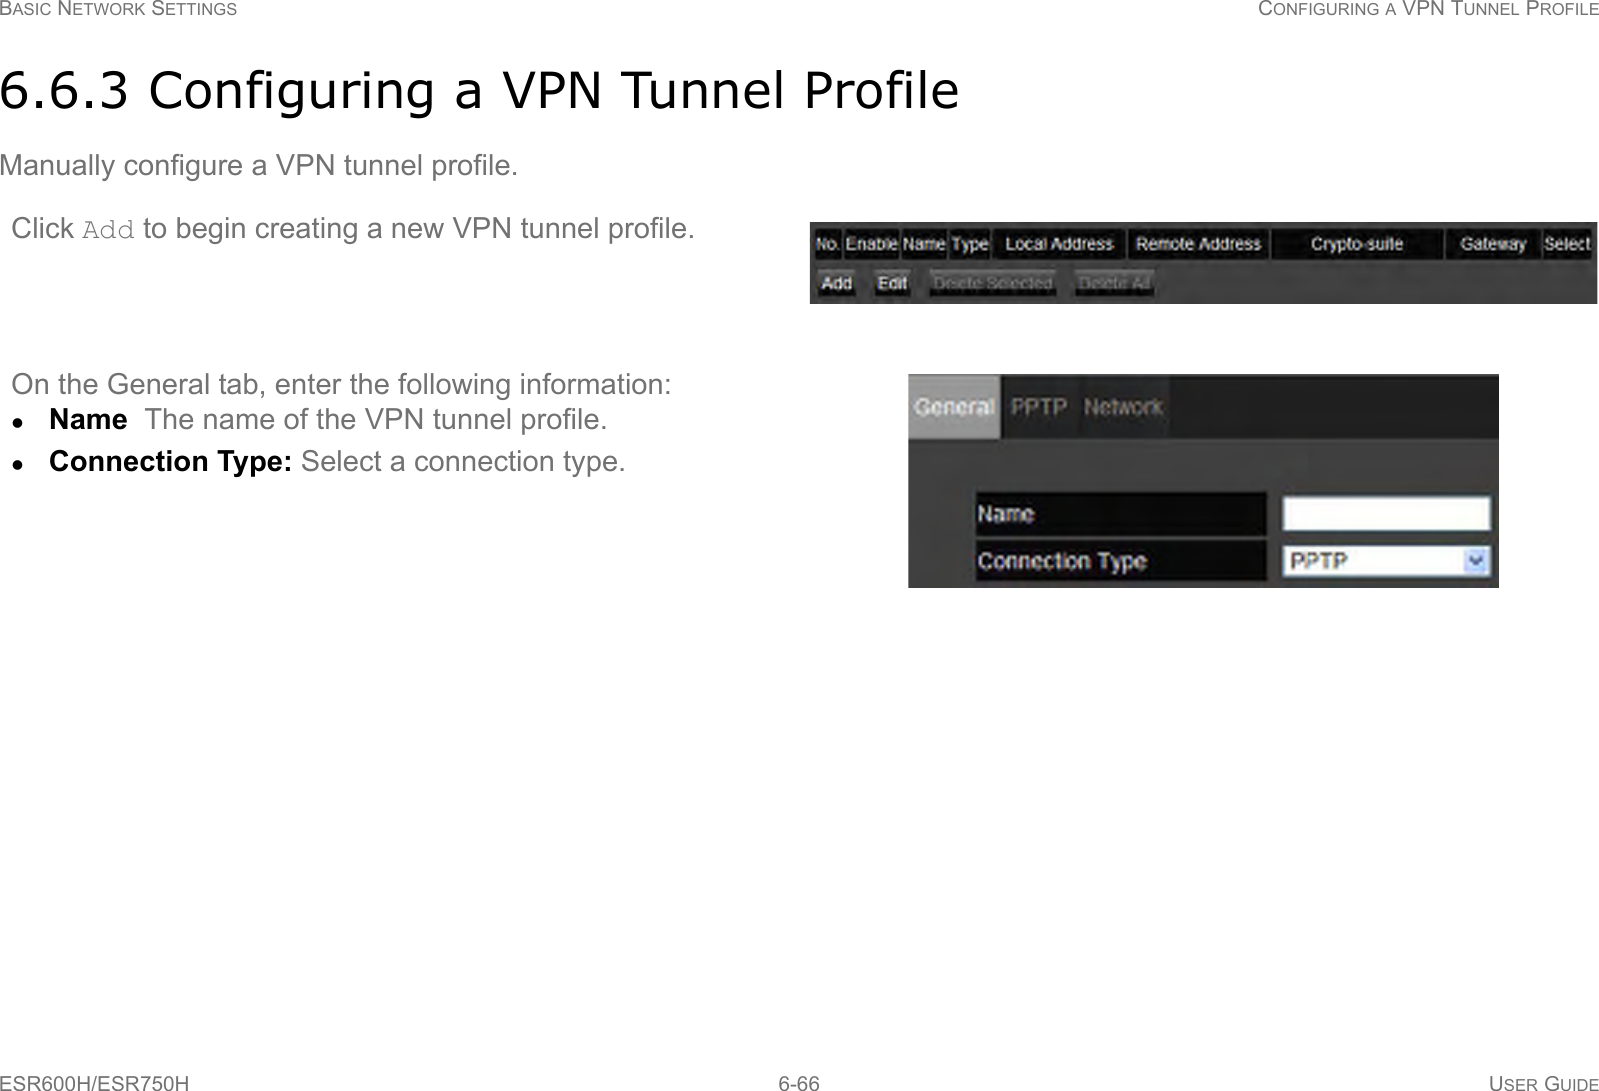 BASIC NETWORK SETTINGS CONFIGURING A VPN TUNNEL PROFILEESR600H/ESR750H 6-66 USER GUIDE6.6.3 Configuring a VPN Tunnel ProfileManually configure a VPN tunnel profile.Click Add to begin creating a new VPN tunnel profile.On the General tab, enter the following information:Name  The name of the VPN tunnel profile.Connection Type: Select a connection type.